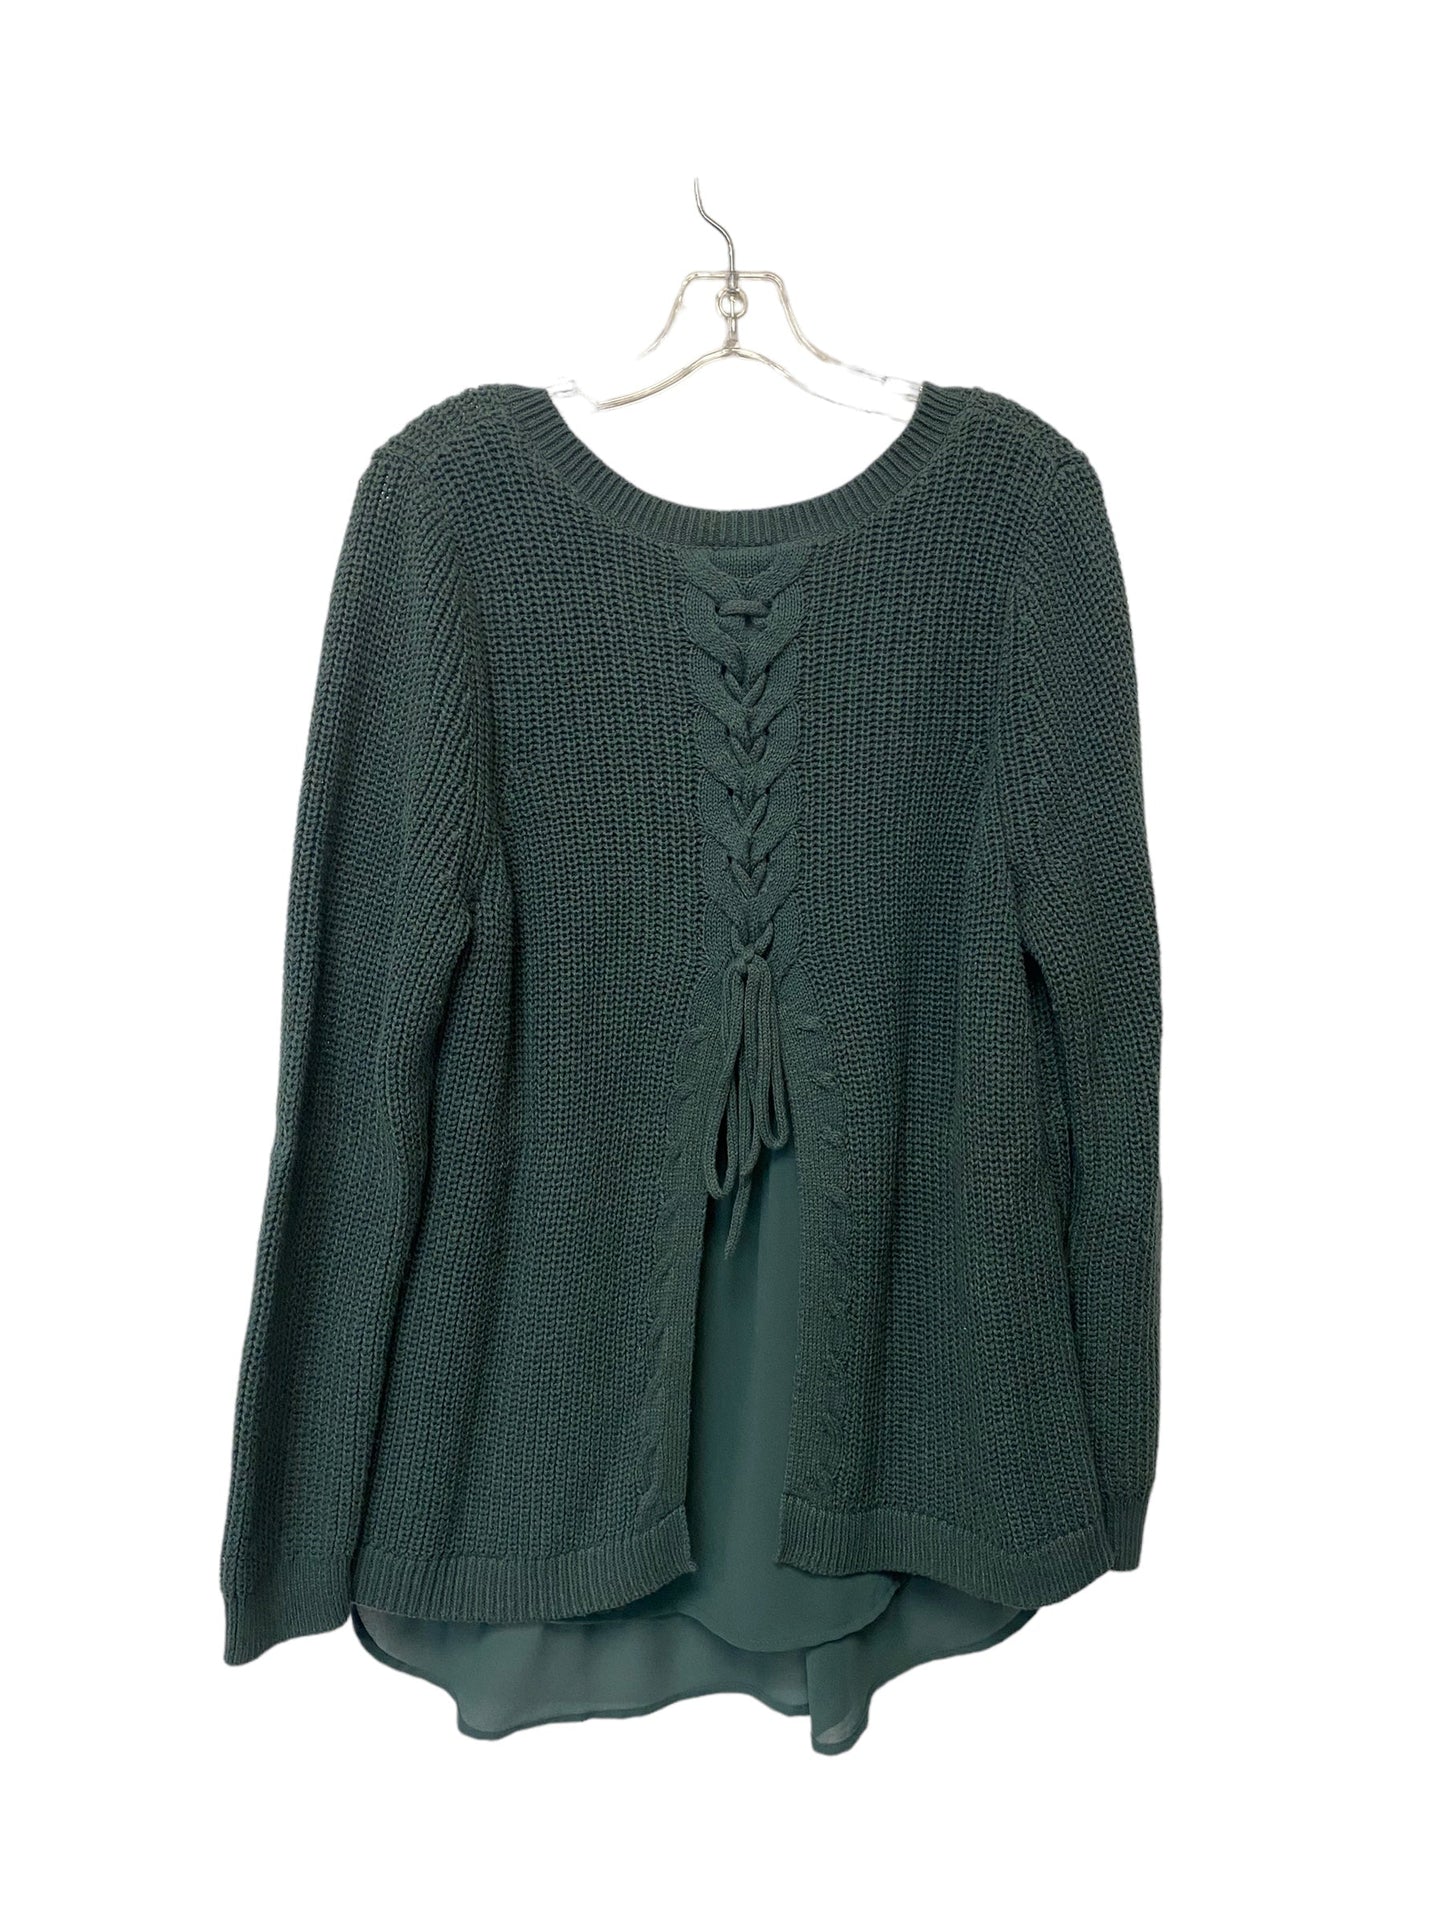 Sweater By Torrid  Size: 2